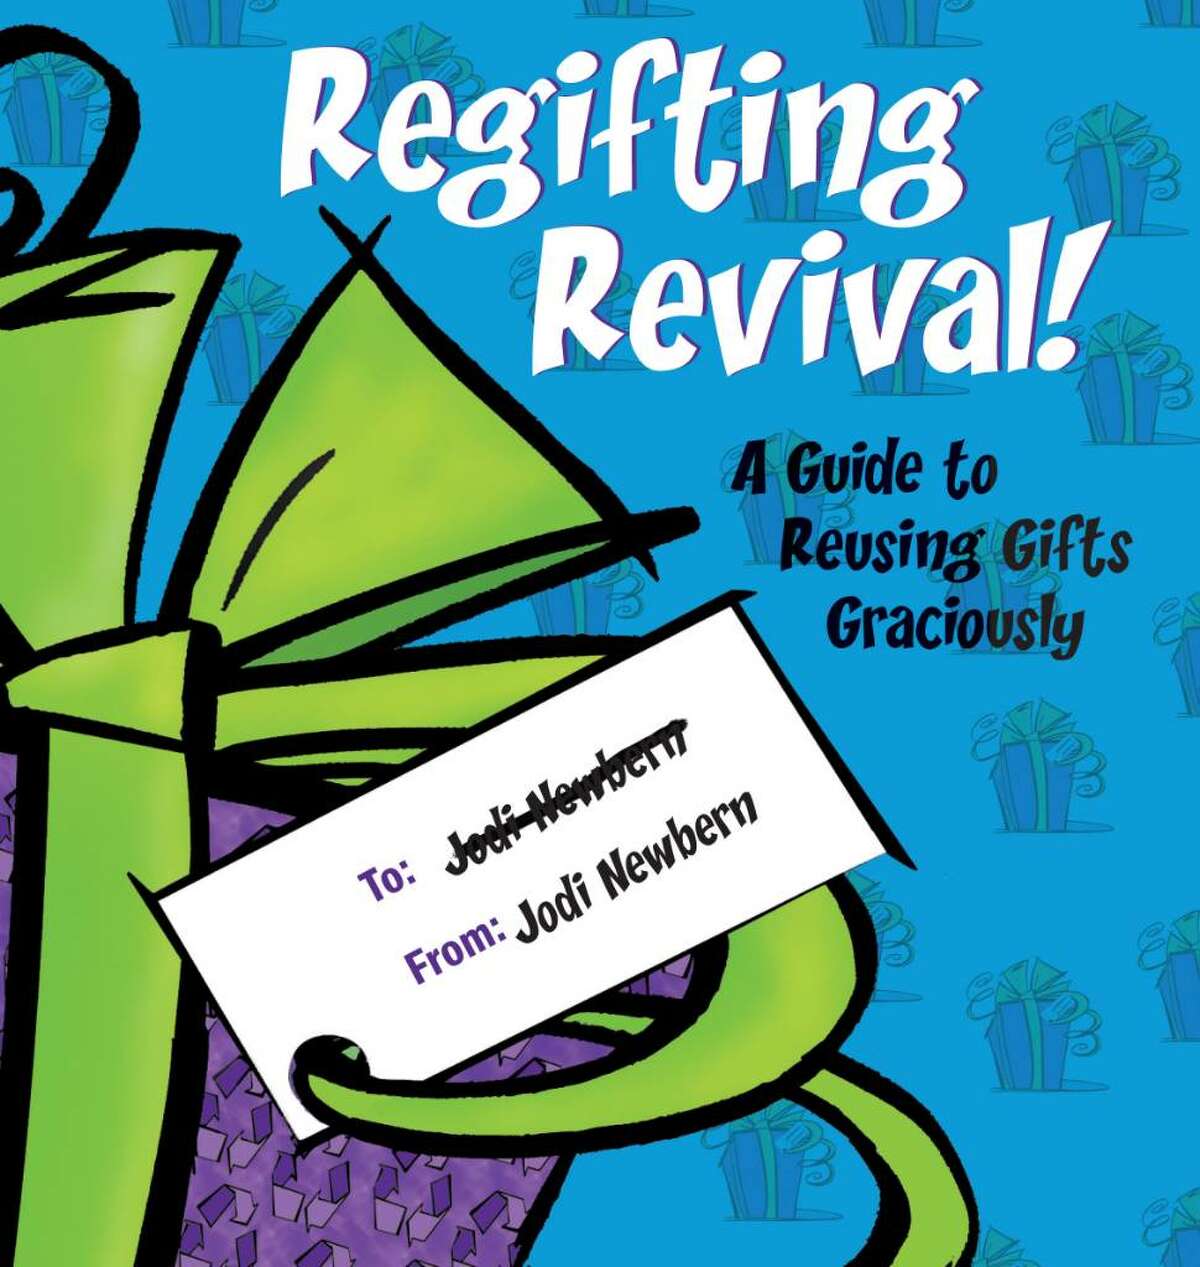 "Regifting Revival: A Guide to Reusing Gifts Graciously" (Synergy Books)